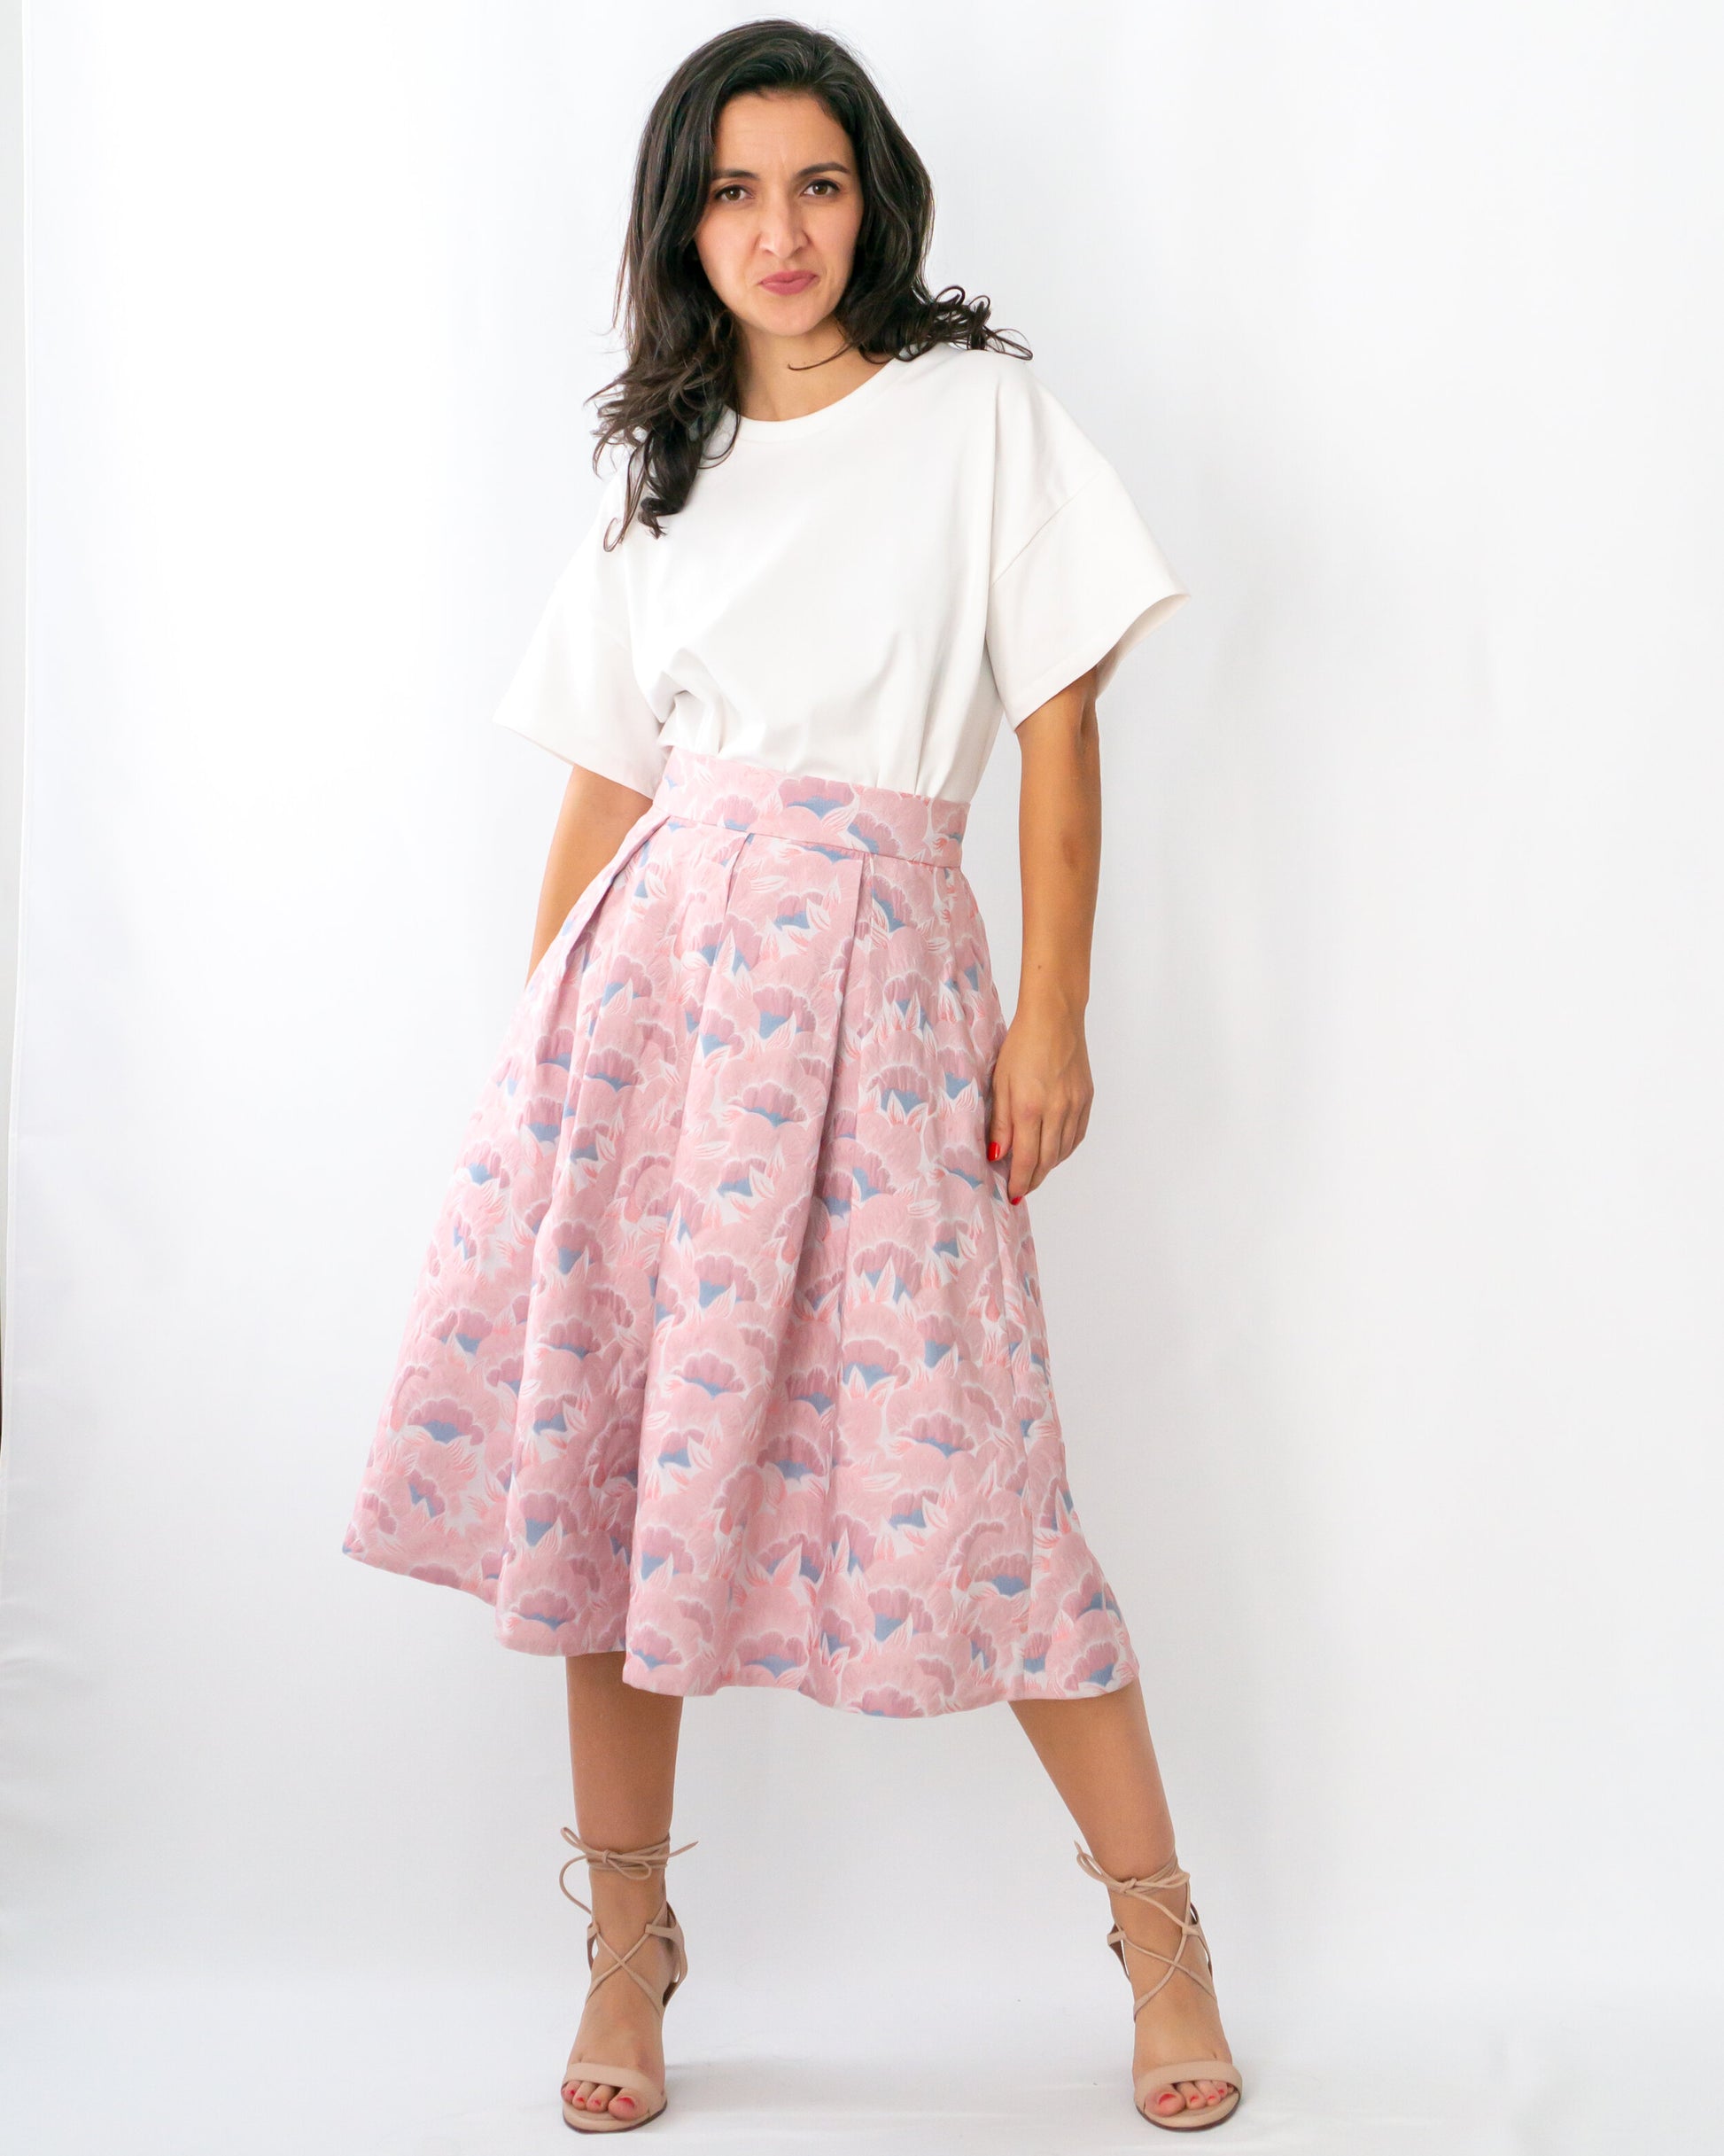 Skirt sewing pattern  Wardrobe By Me - We love sewing!